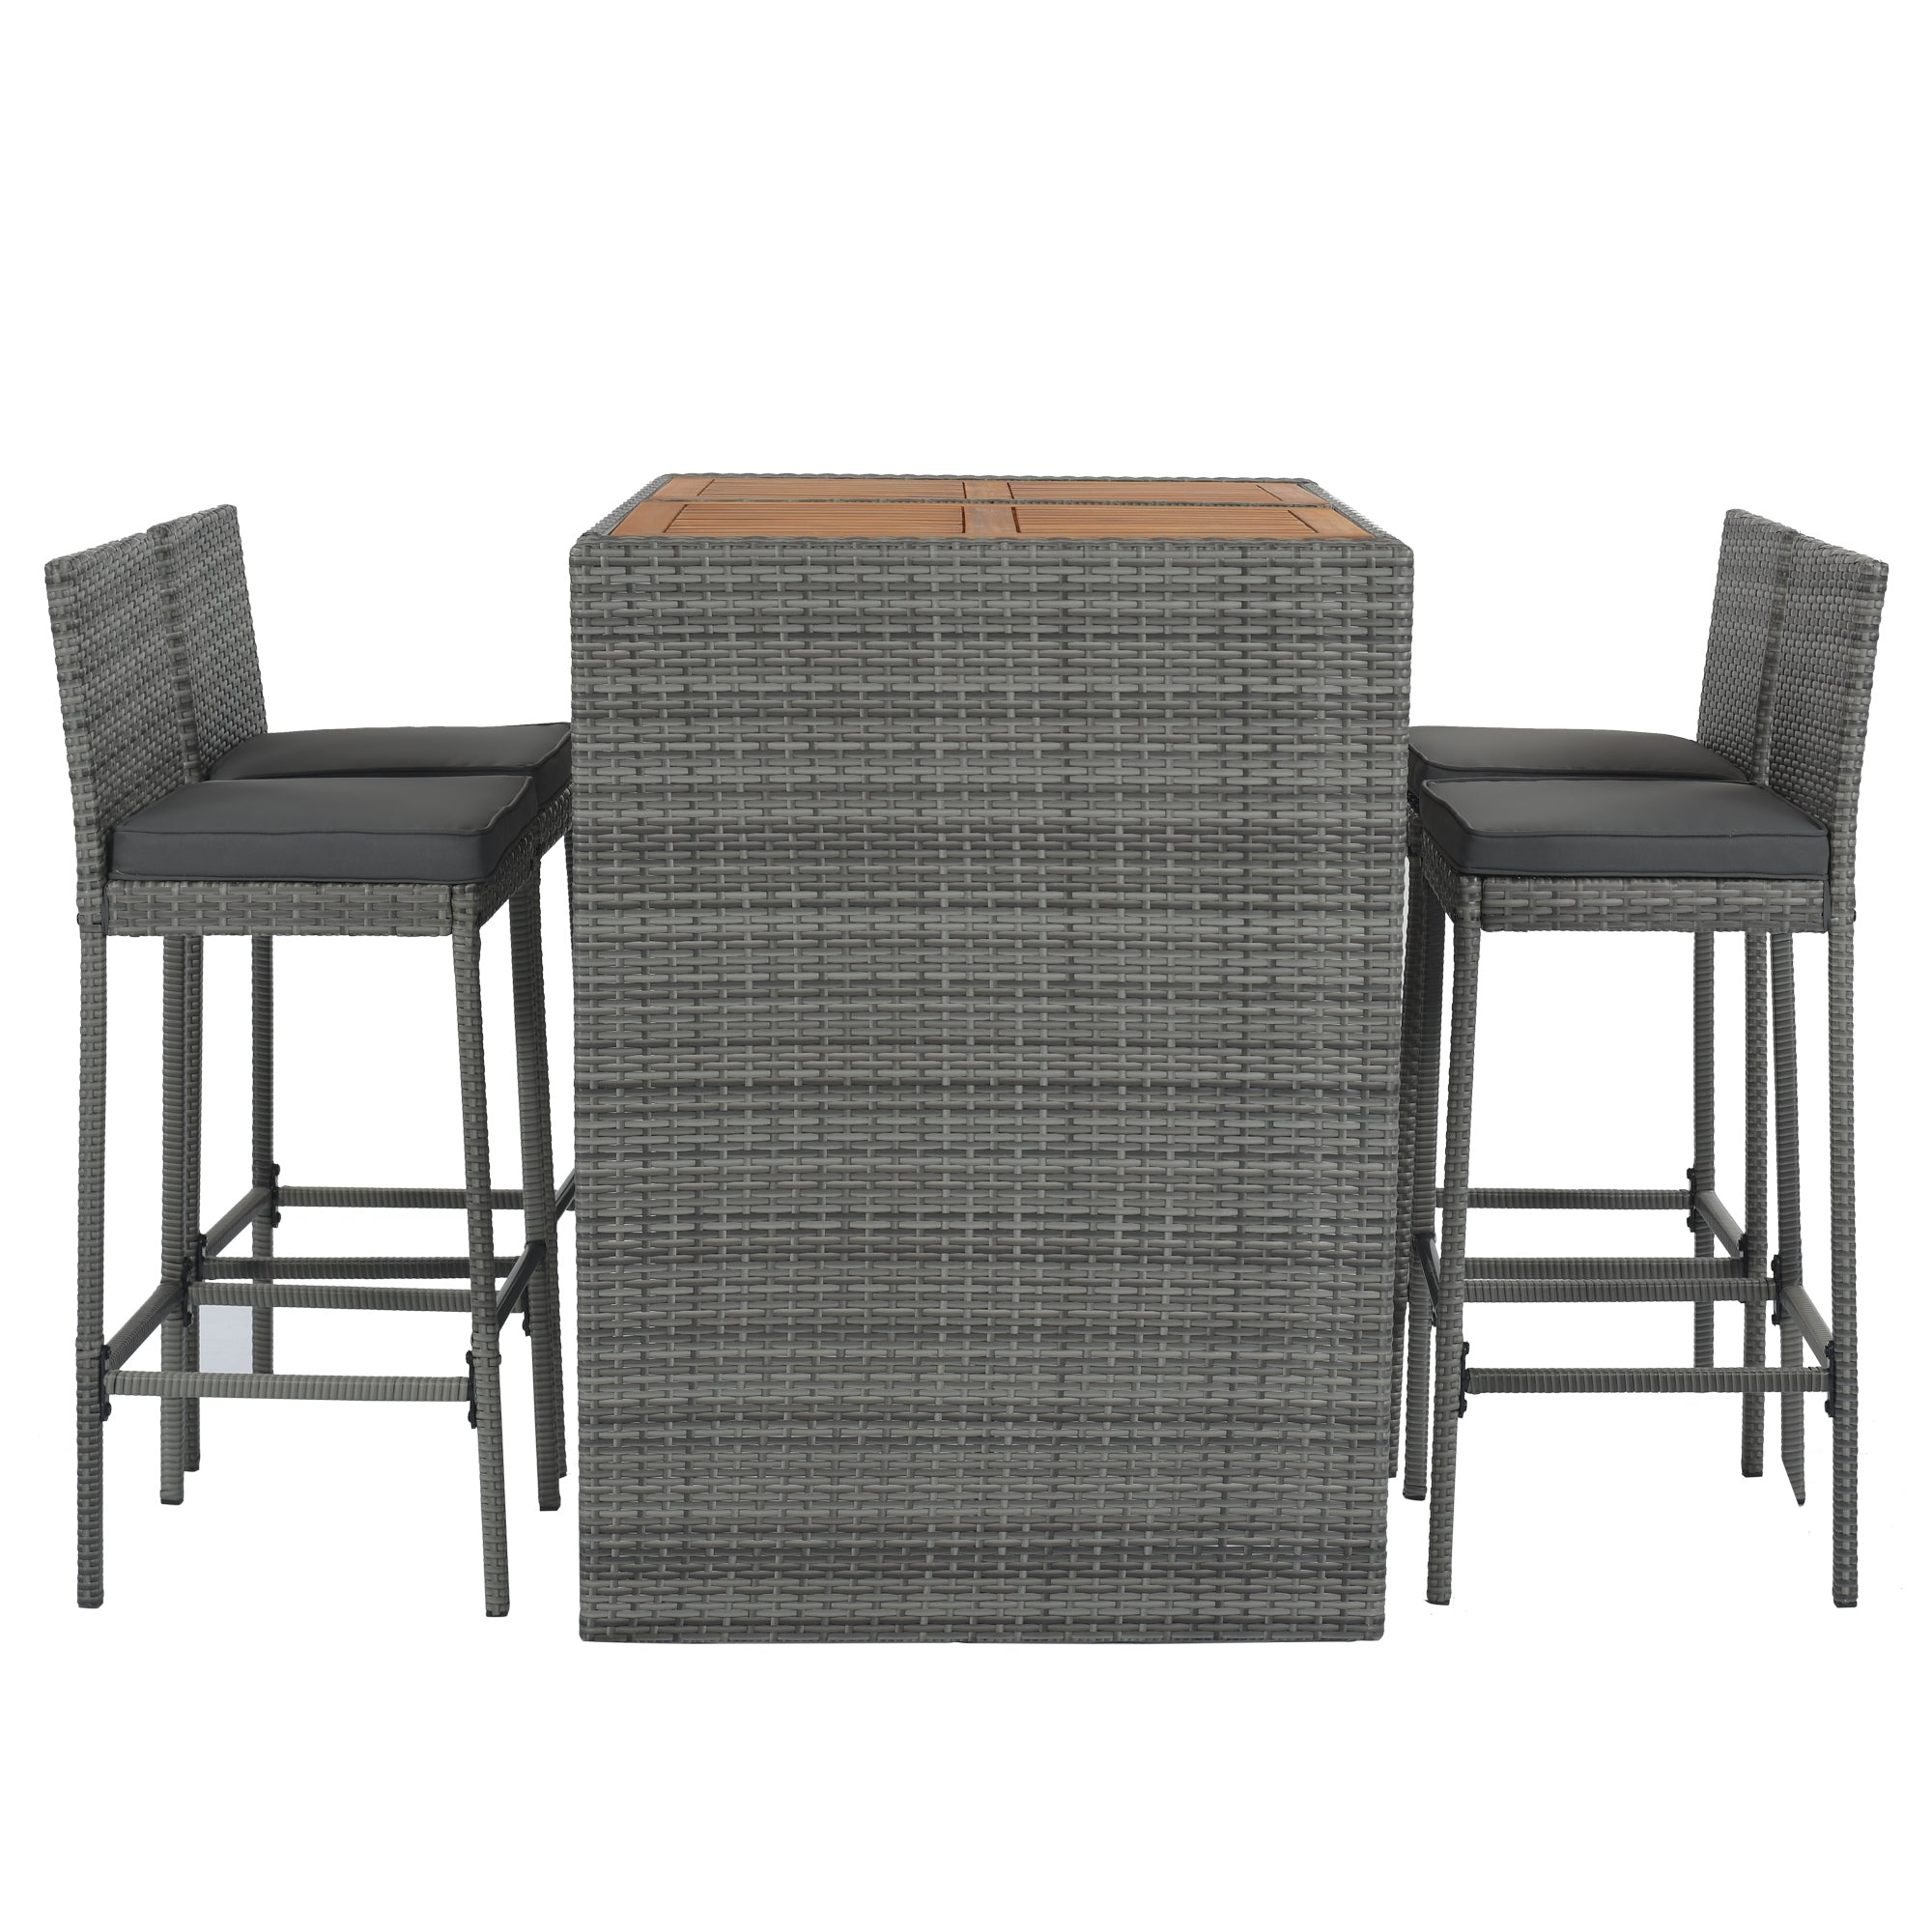 5-pieces Patio Wicker Bar Set, Bar Height Chairs With Non-Slip Feet And Fixed Rope, Removable Cushion, Acacia Wood Table Top, Brown Wood And Gray Wicker